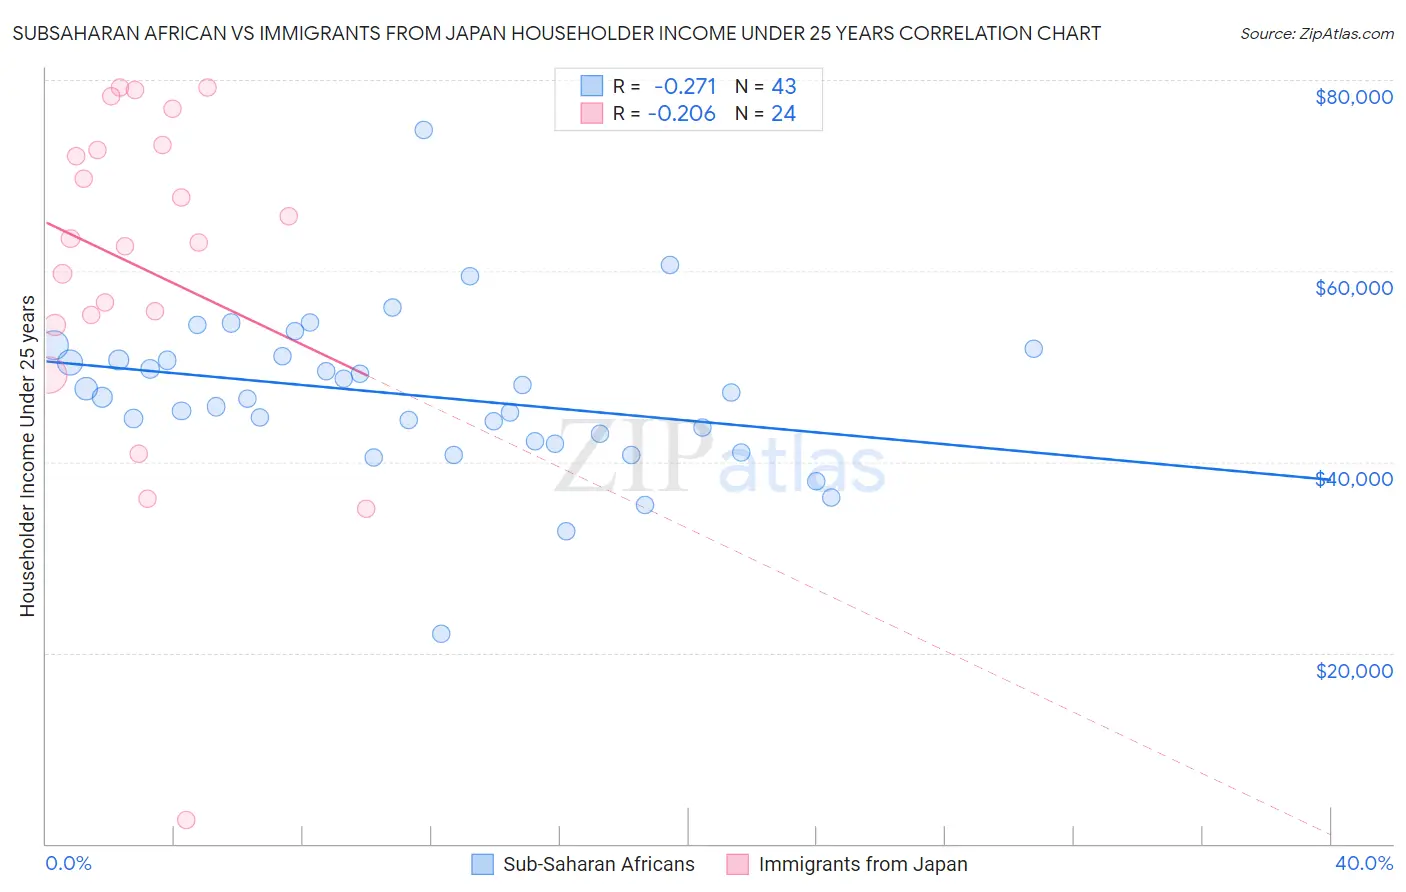 Subsaharan African vs Immigrants from Japan Householder Income Under 25 years